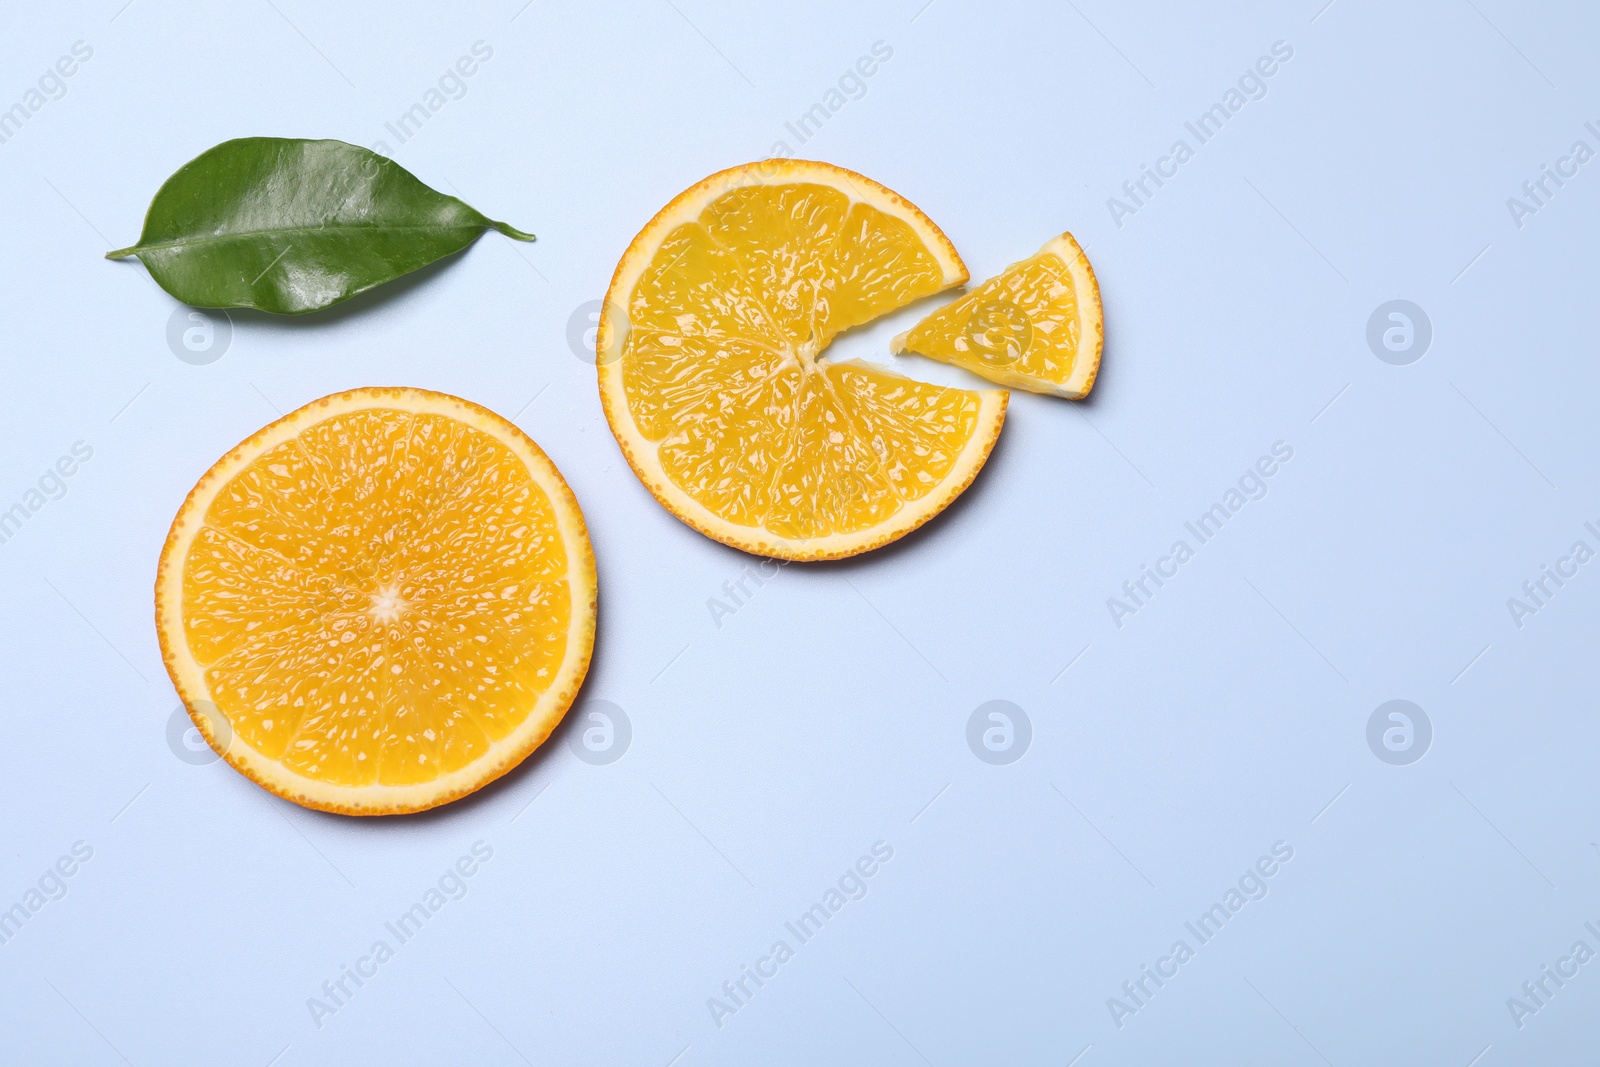 Photo of Slices of juicy orange and leaf on light blue background, top view. Space for text